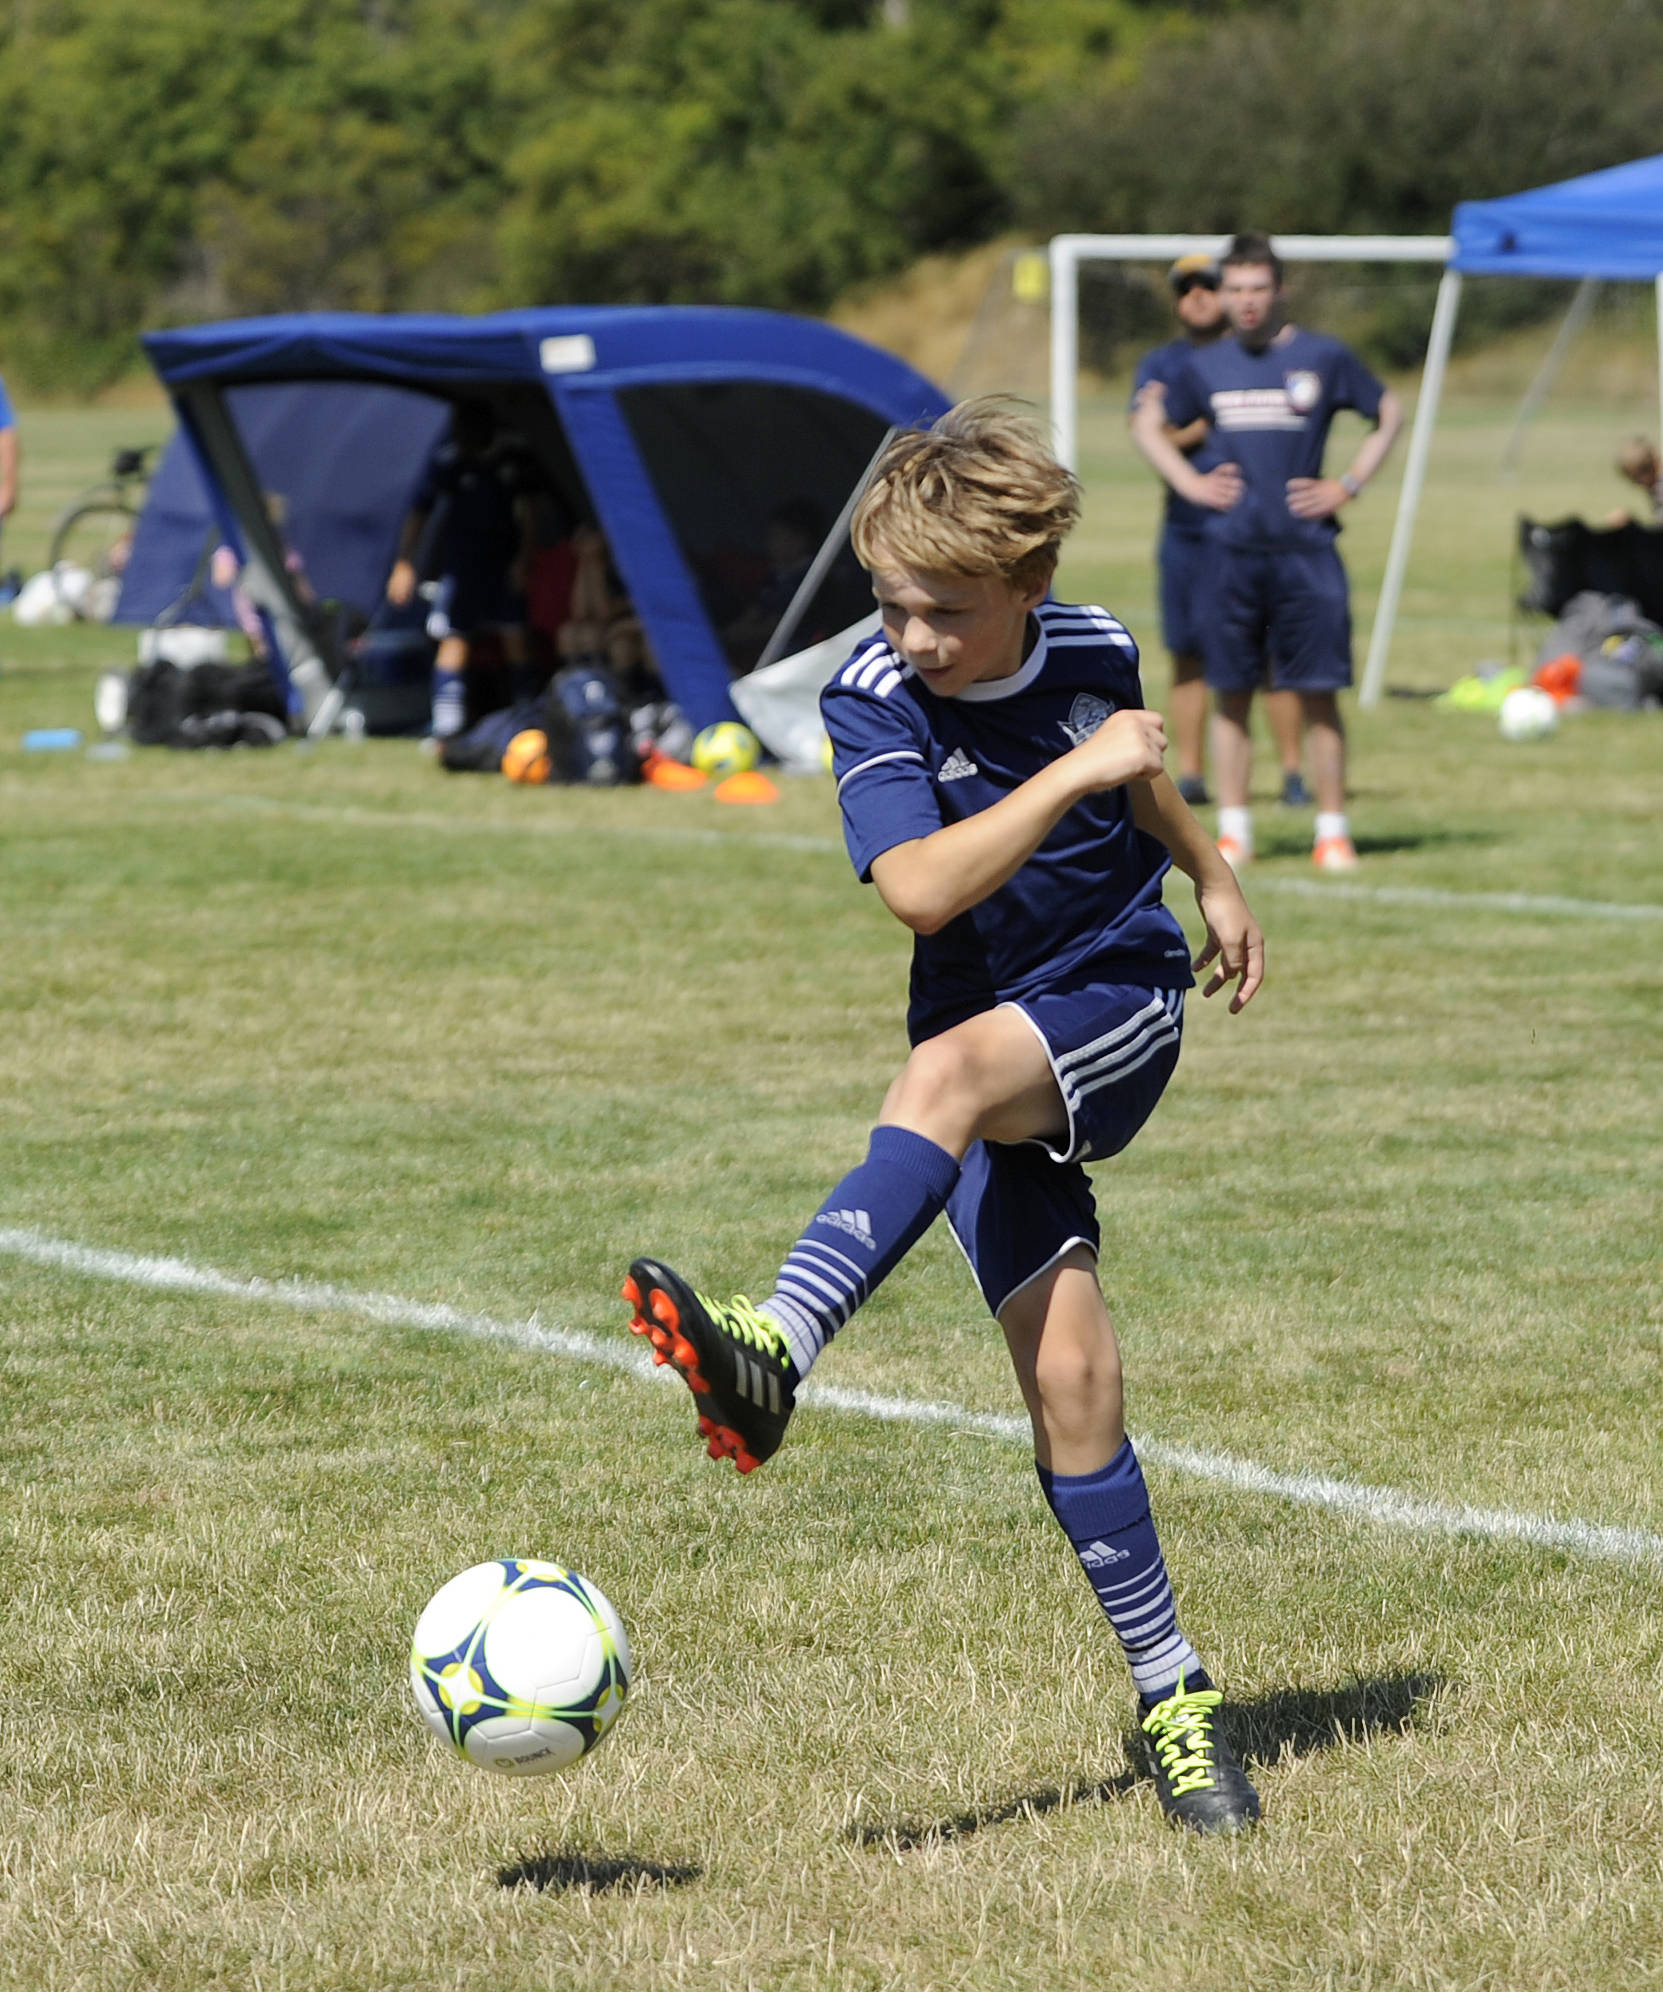 James Mason of Storm King BU07 helps his squad finish in a regulation tie against NK Kraken; Storm King eventually won on penalty kicks (3-2).                                 Sequim Gazette photo by Michael Dashiell